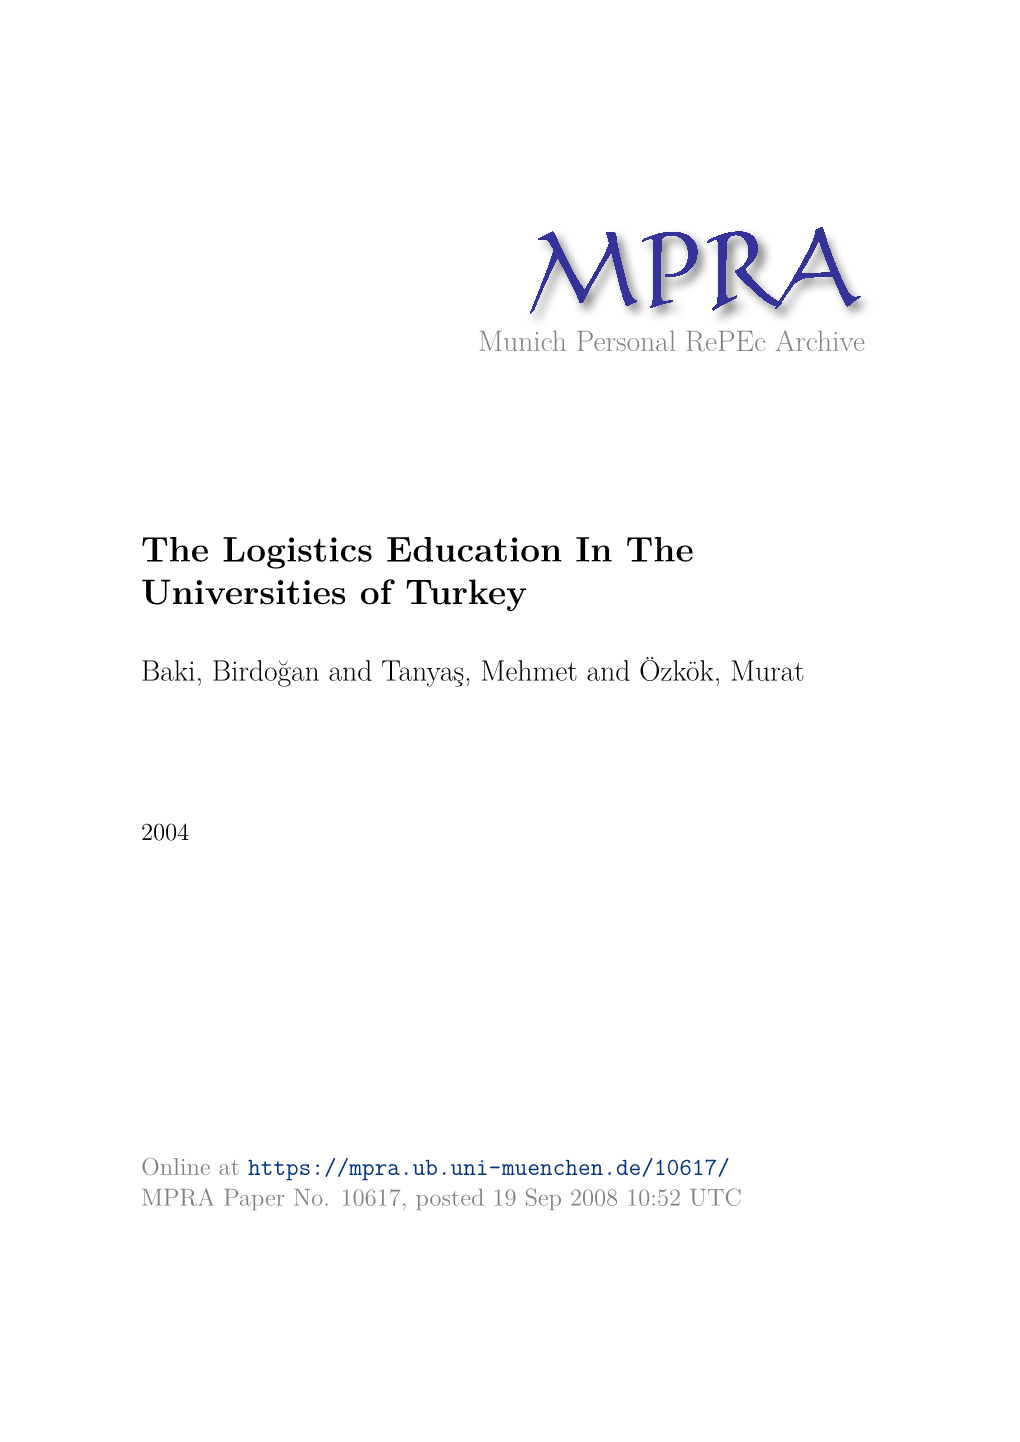 The Logistics Education in the Universities of Turkey